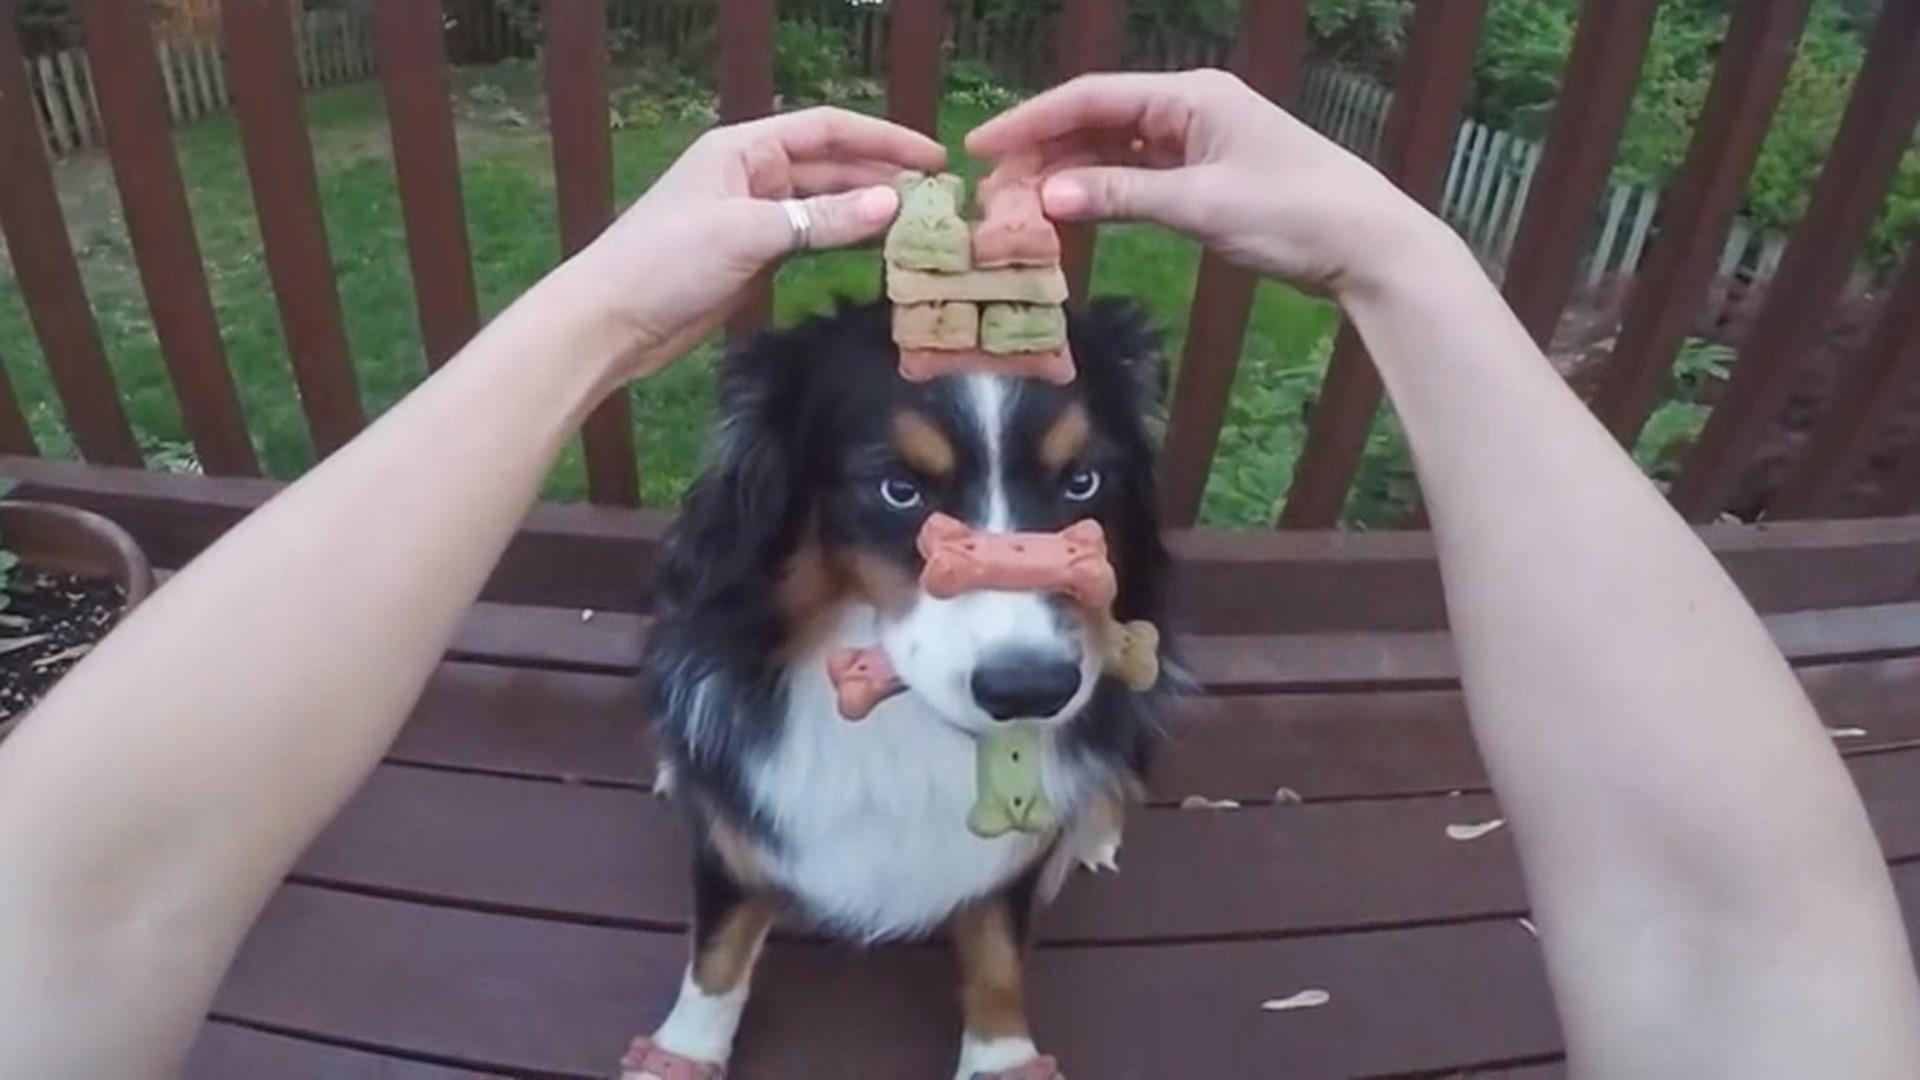 Watch insanely disciplined dog balance treats on head, paws and in his mouth